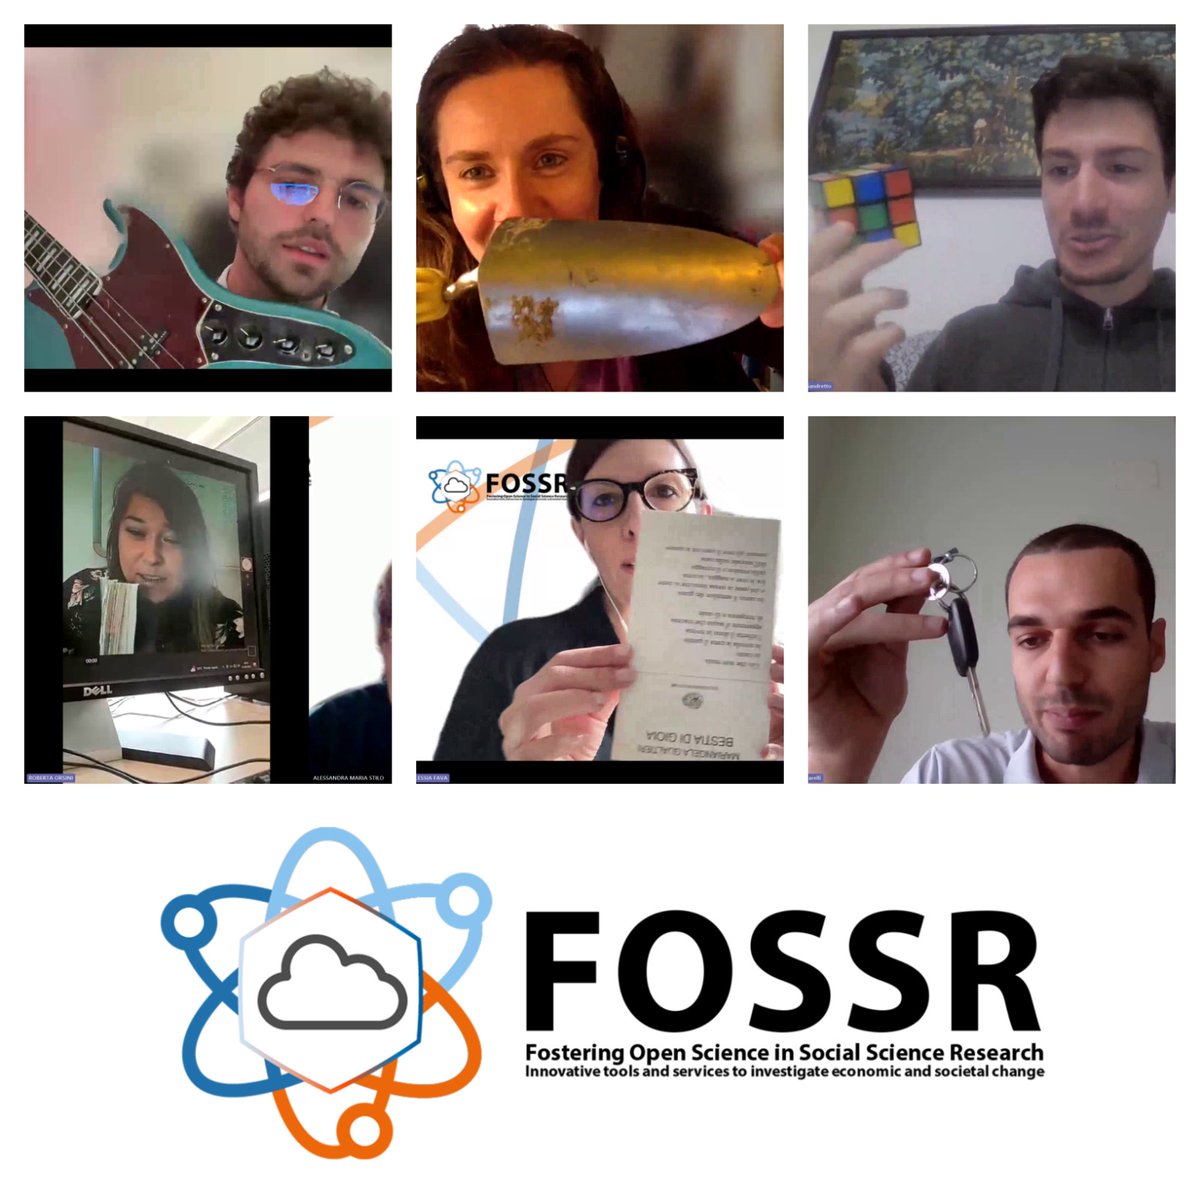 #FOSSRpeople The second FOSSR Café introduced PhD students and temporary staff, emphasizing community cohesion. Participants used symbolic objects to express their research involvement and aspirations.
👉 fossr.eu/secondo-fossr-…

#PNRR @ItaliaDomaniGov @mur_gov_ @EU_Commission